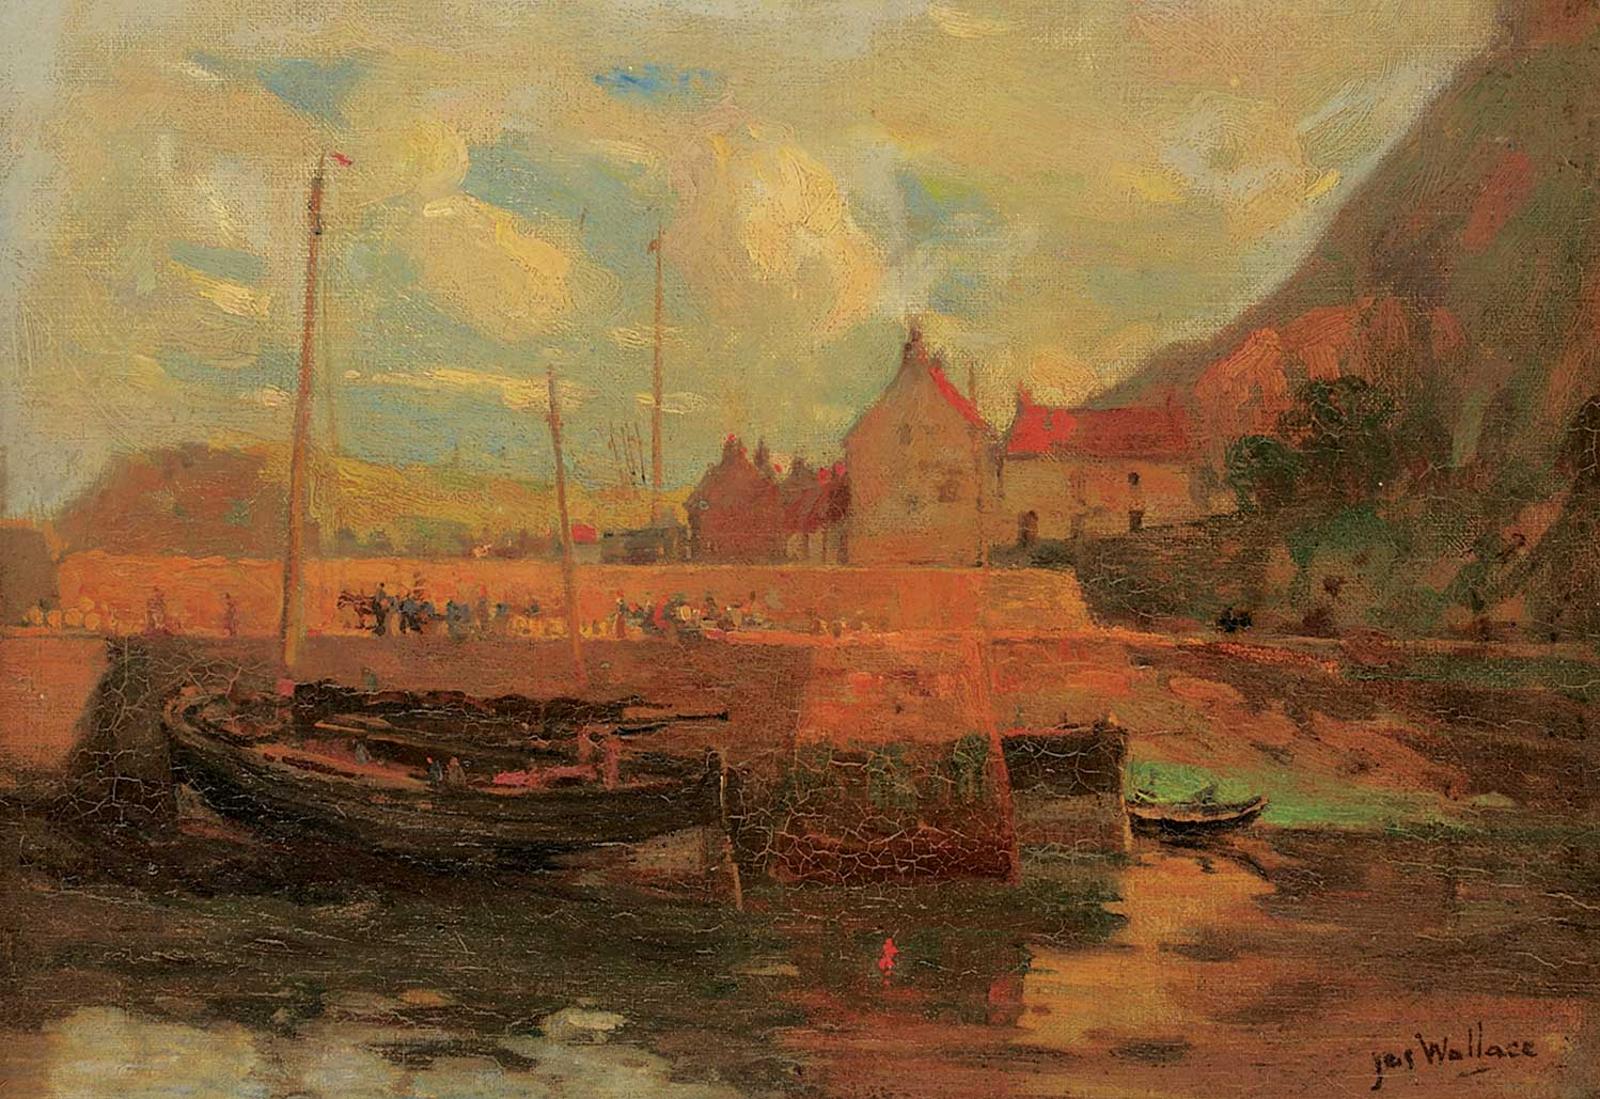 Jes Wallace - Untitled - Ships in the Harbour